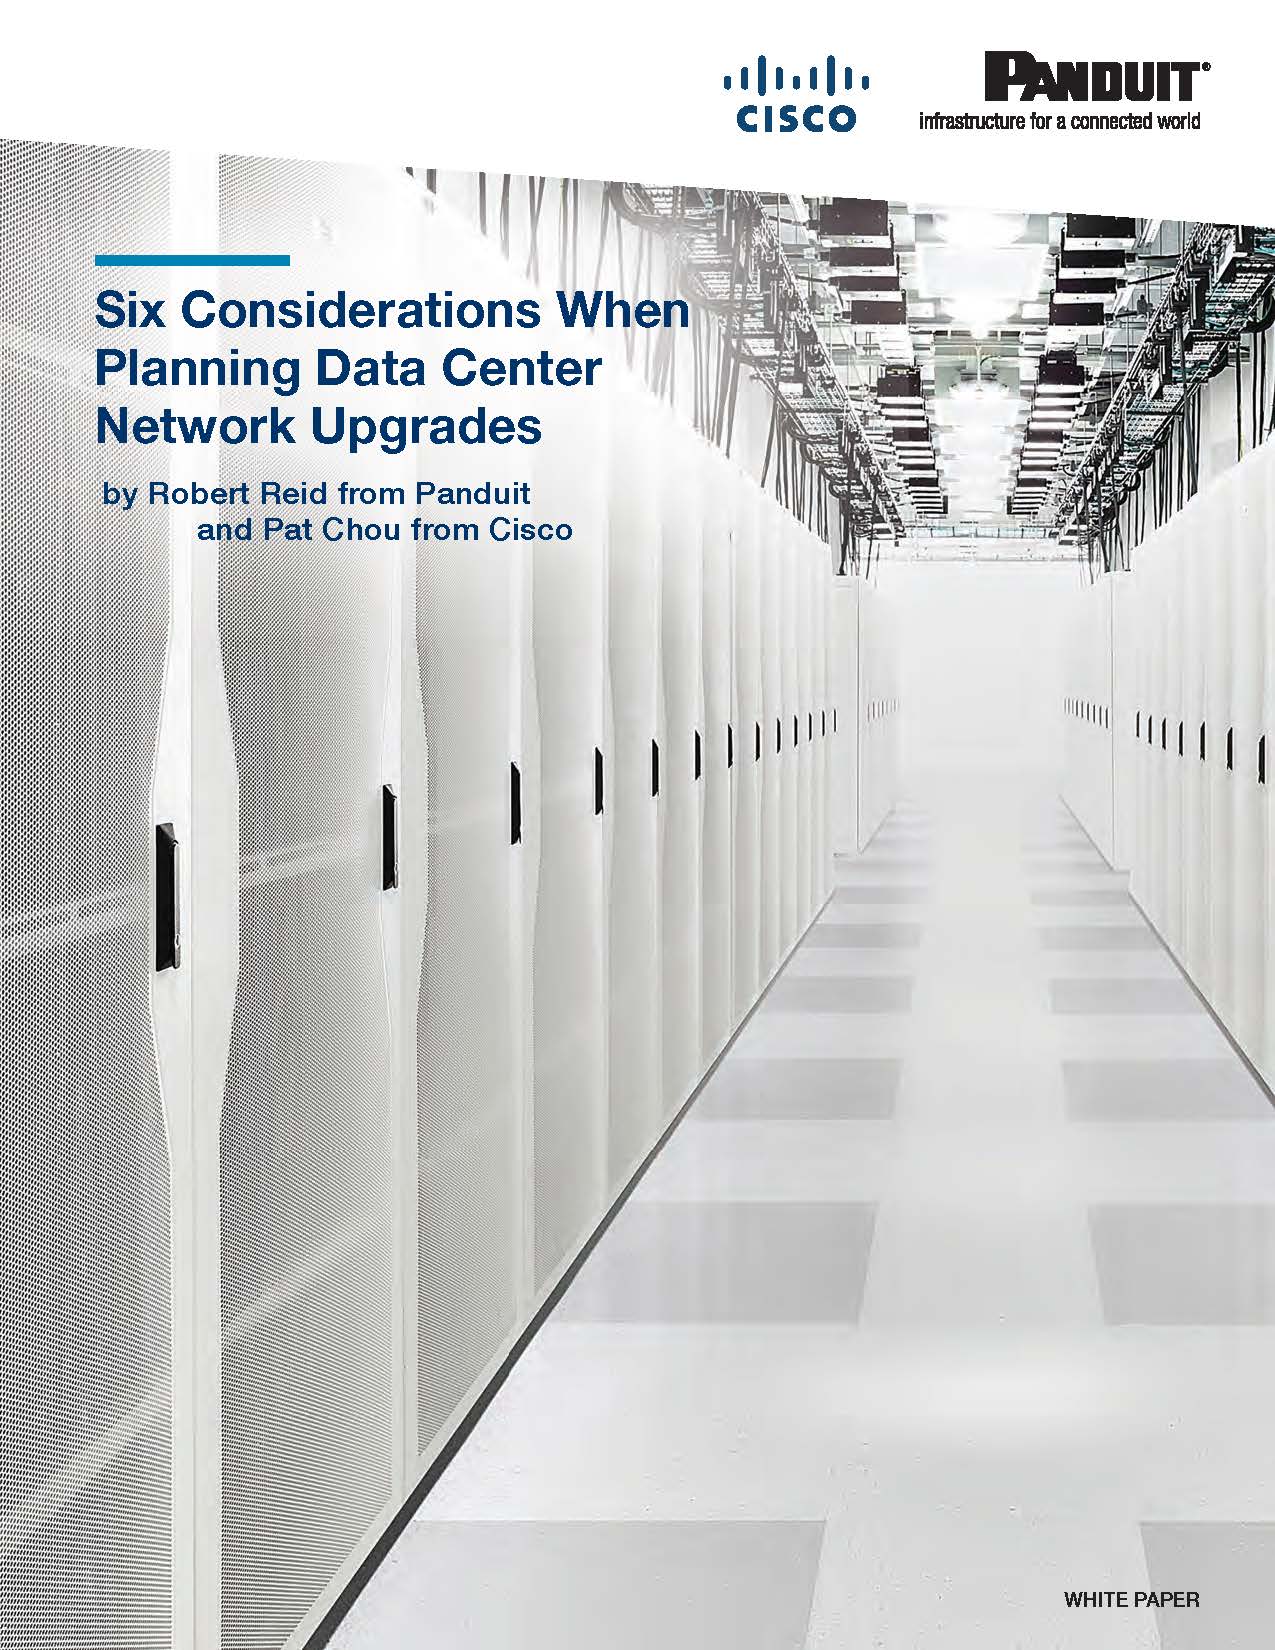 Six Considerations When Planning Data Center Network Upgrades